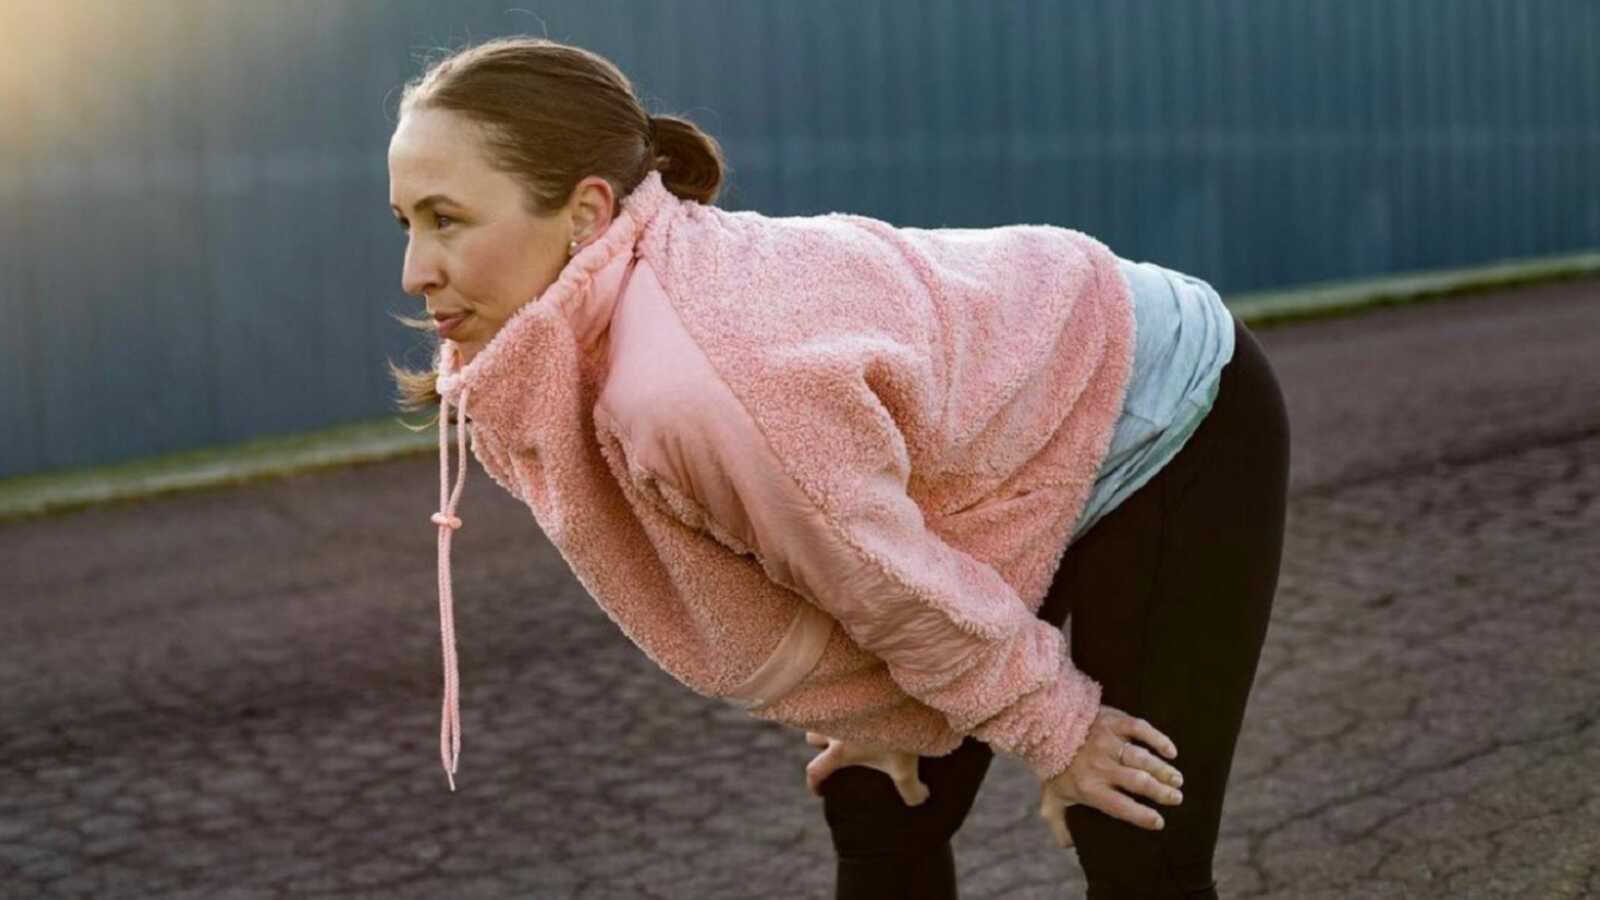 Mom leans over and rests during a workout in a pink hoodie